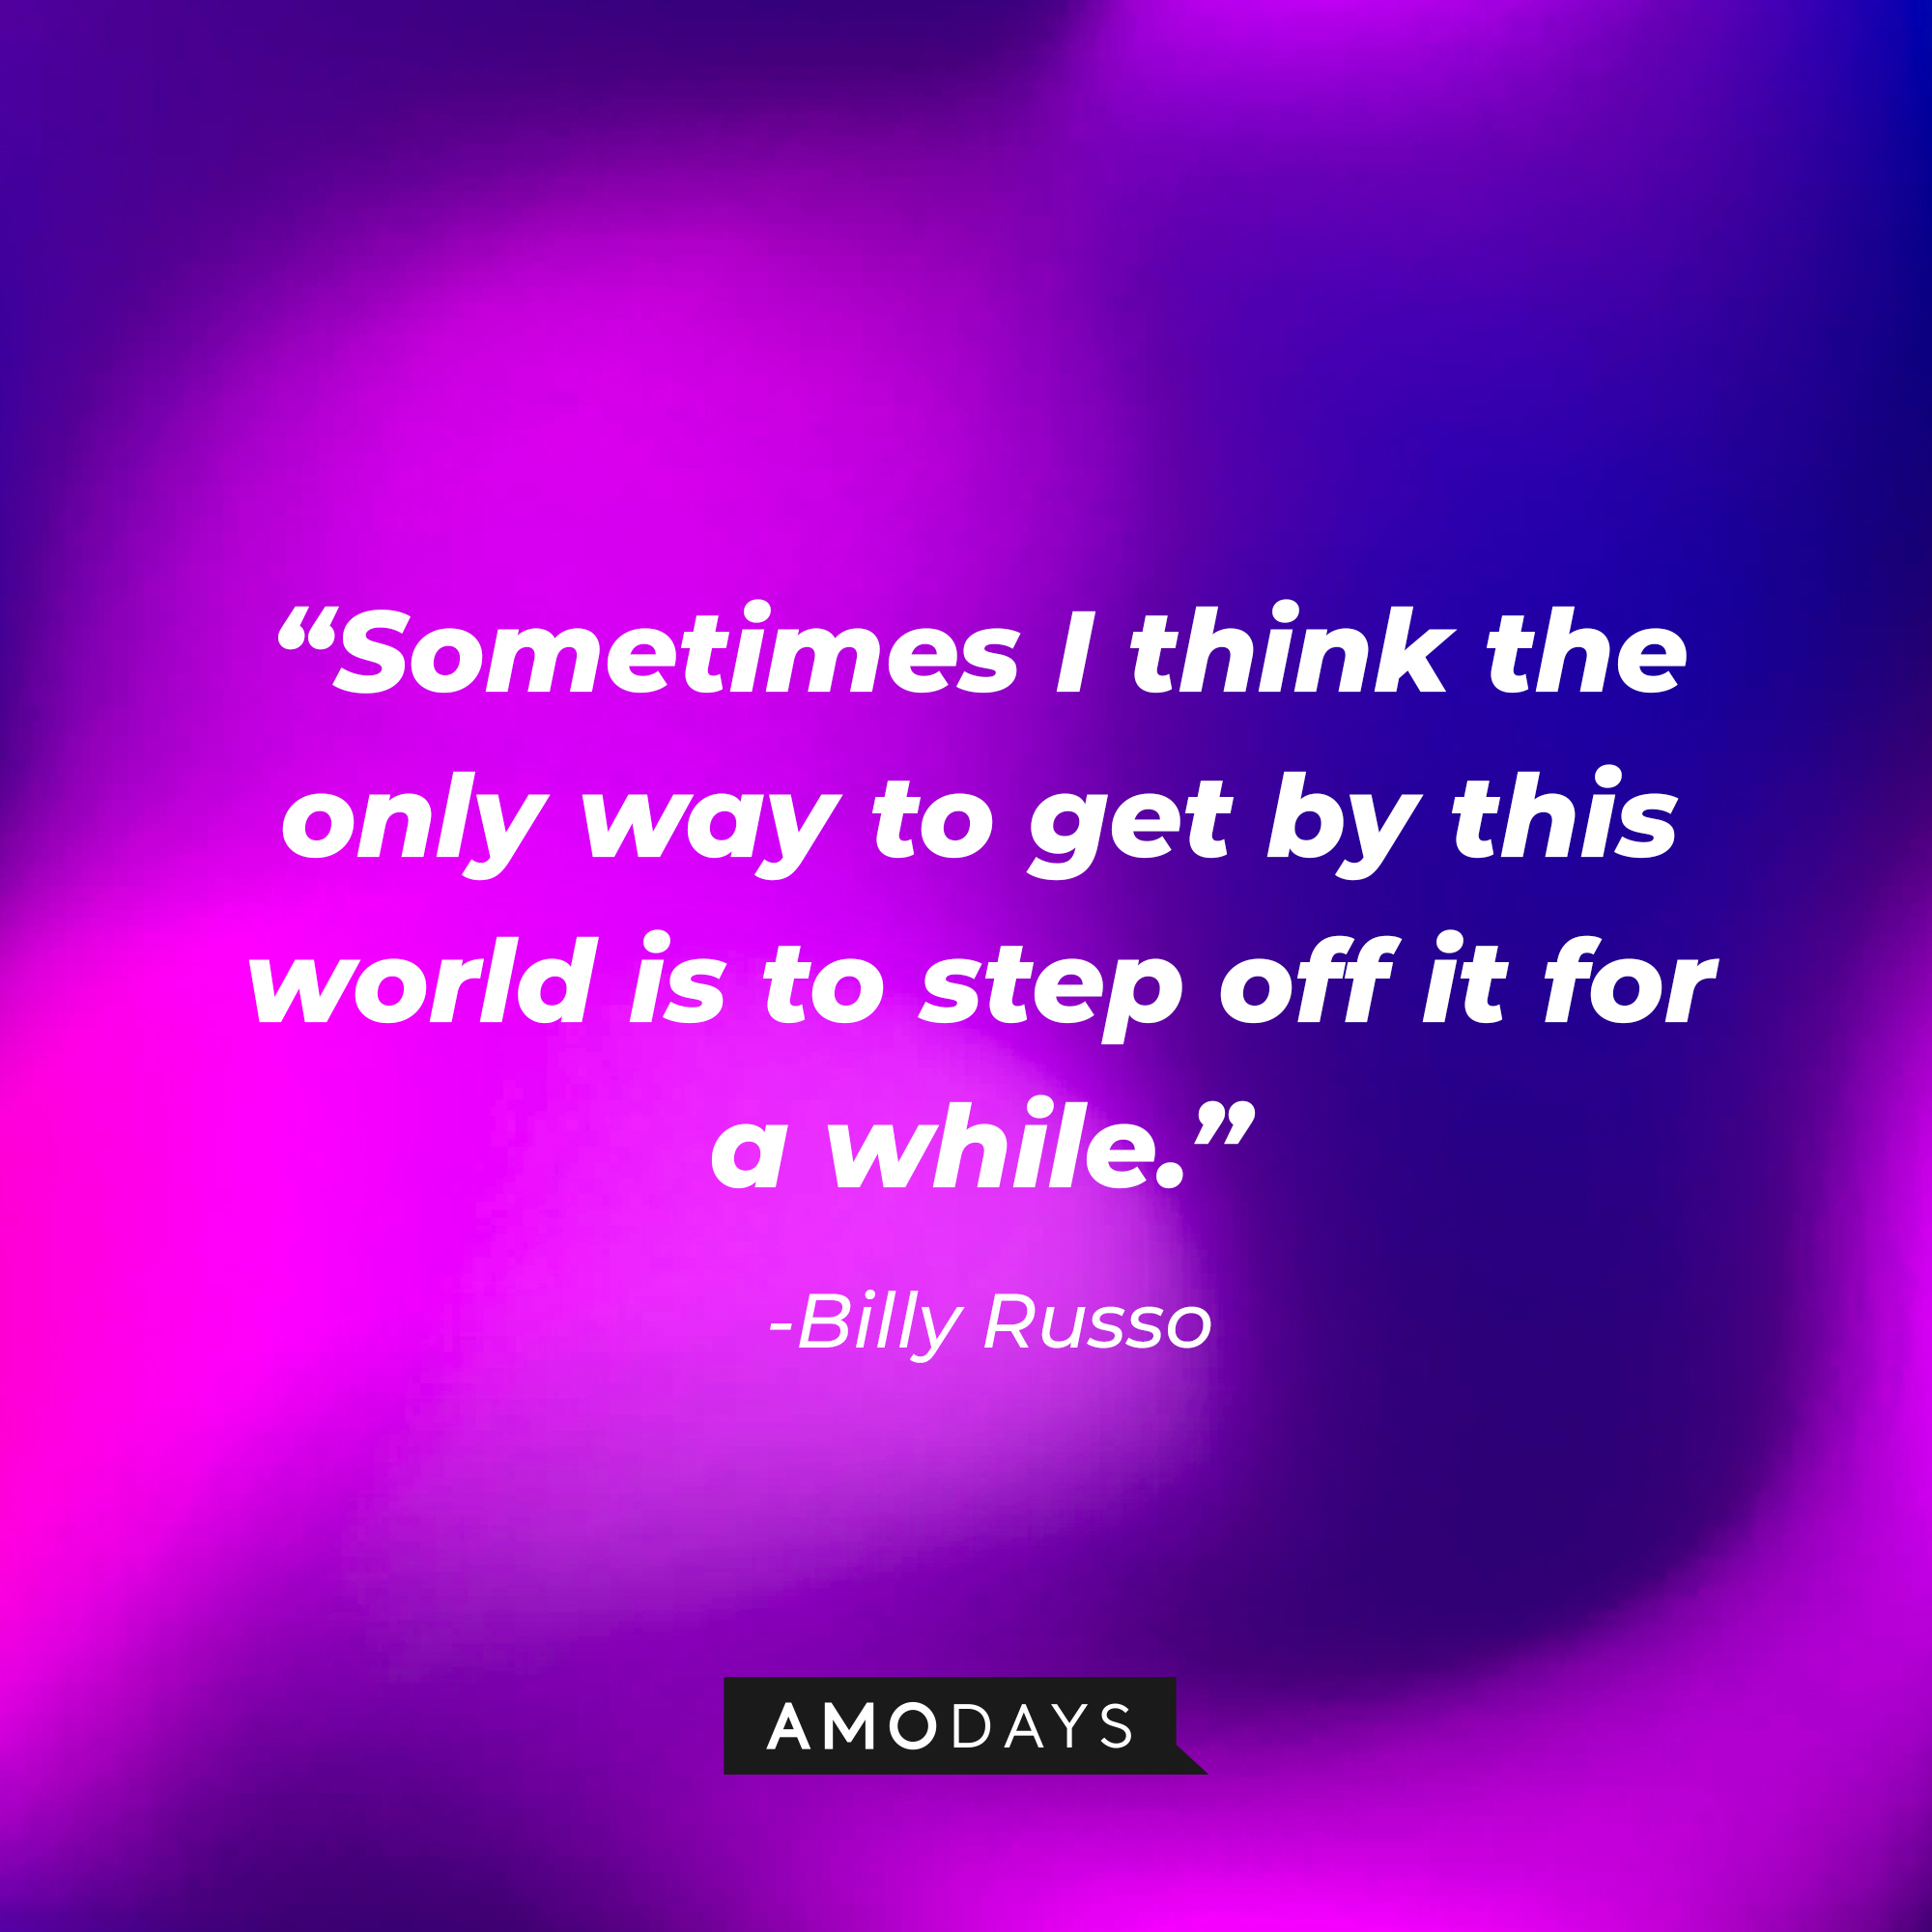 Billy Russo’s quote: “Sometimes I think the only way to get by this world is to step off it for a while.” | Source: AmoDays